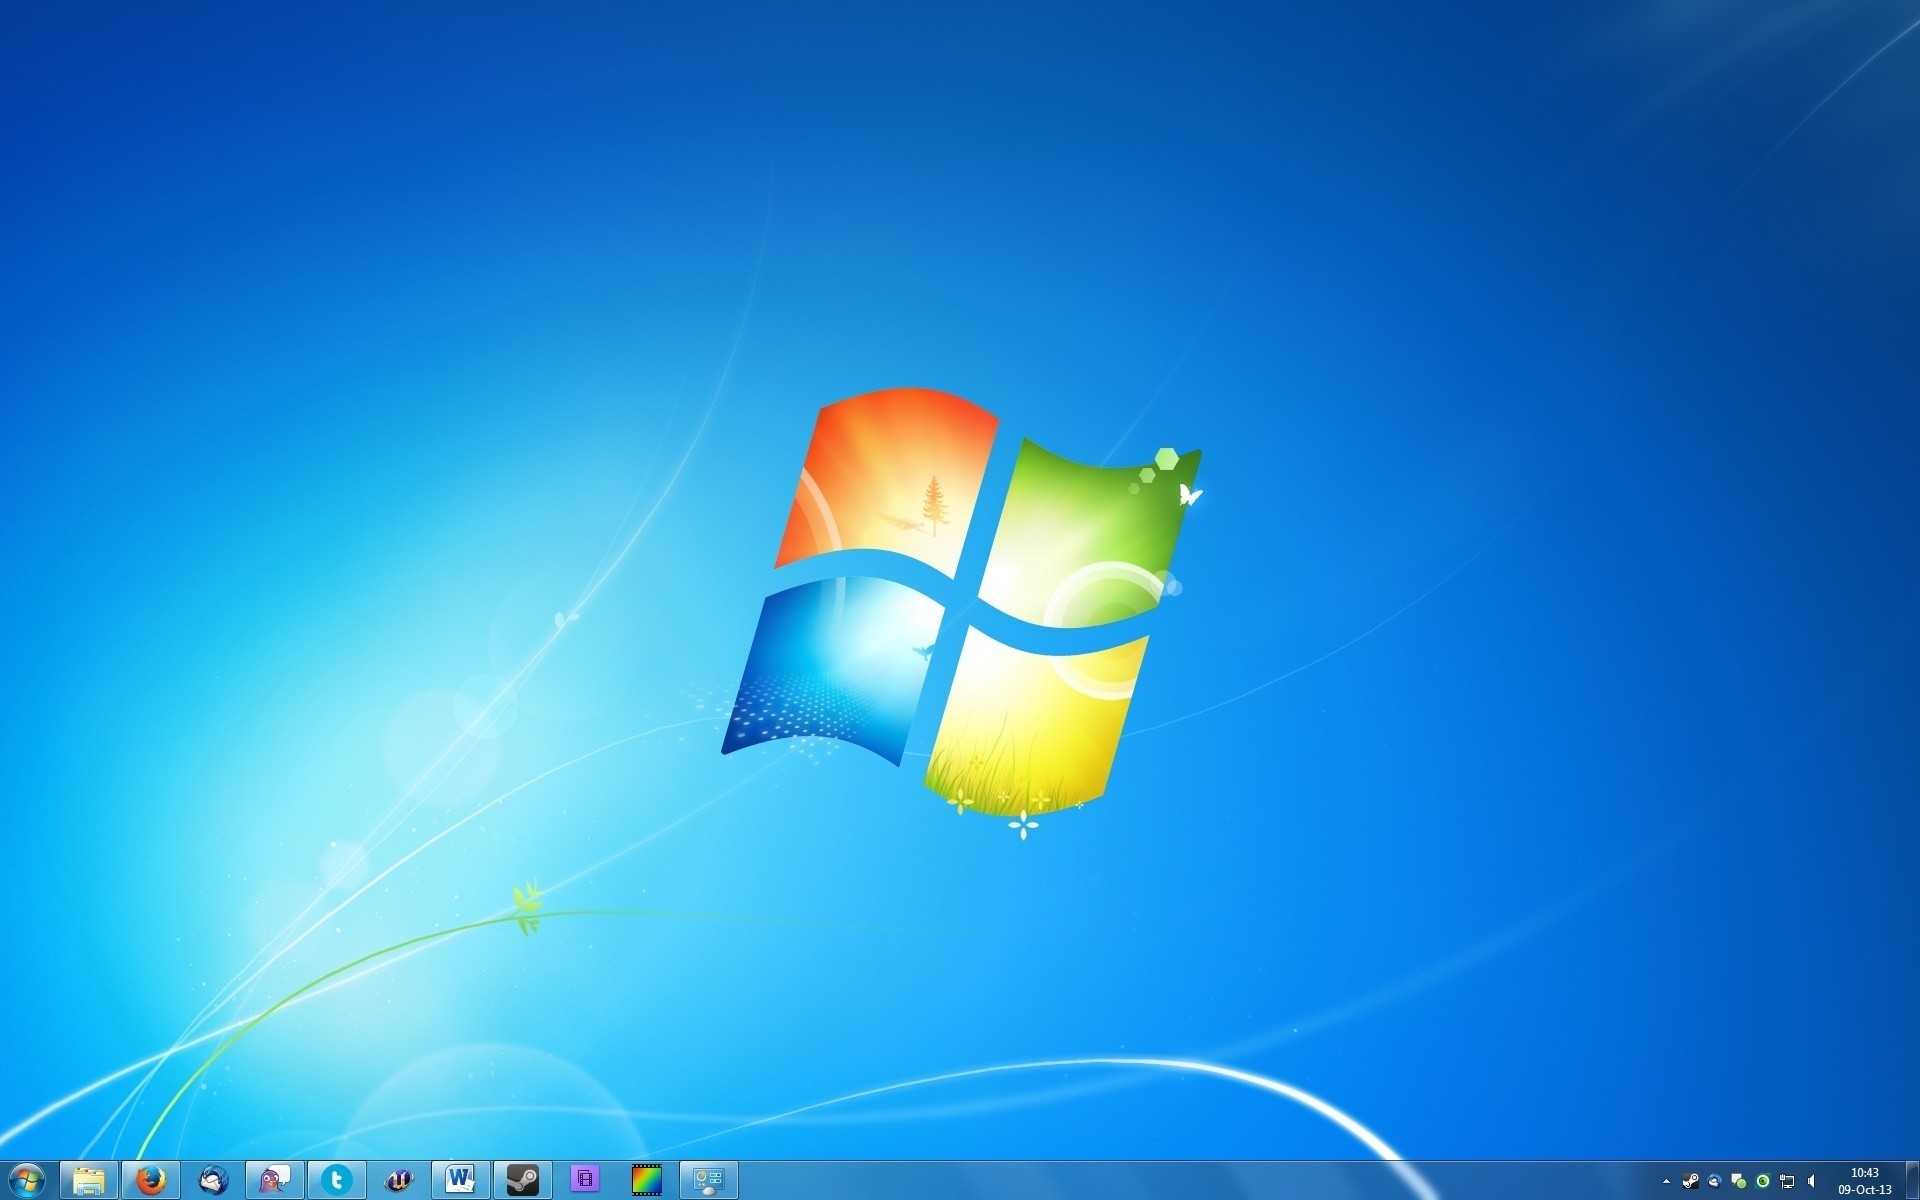 Whats new in the latest windows 7 patch tuesday update